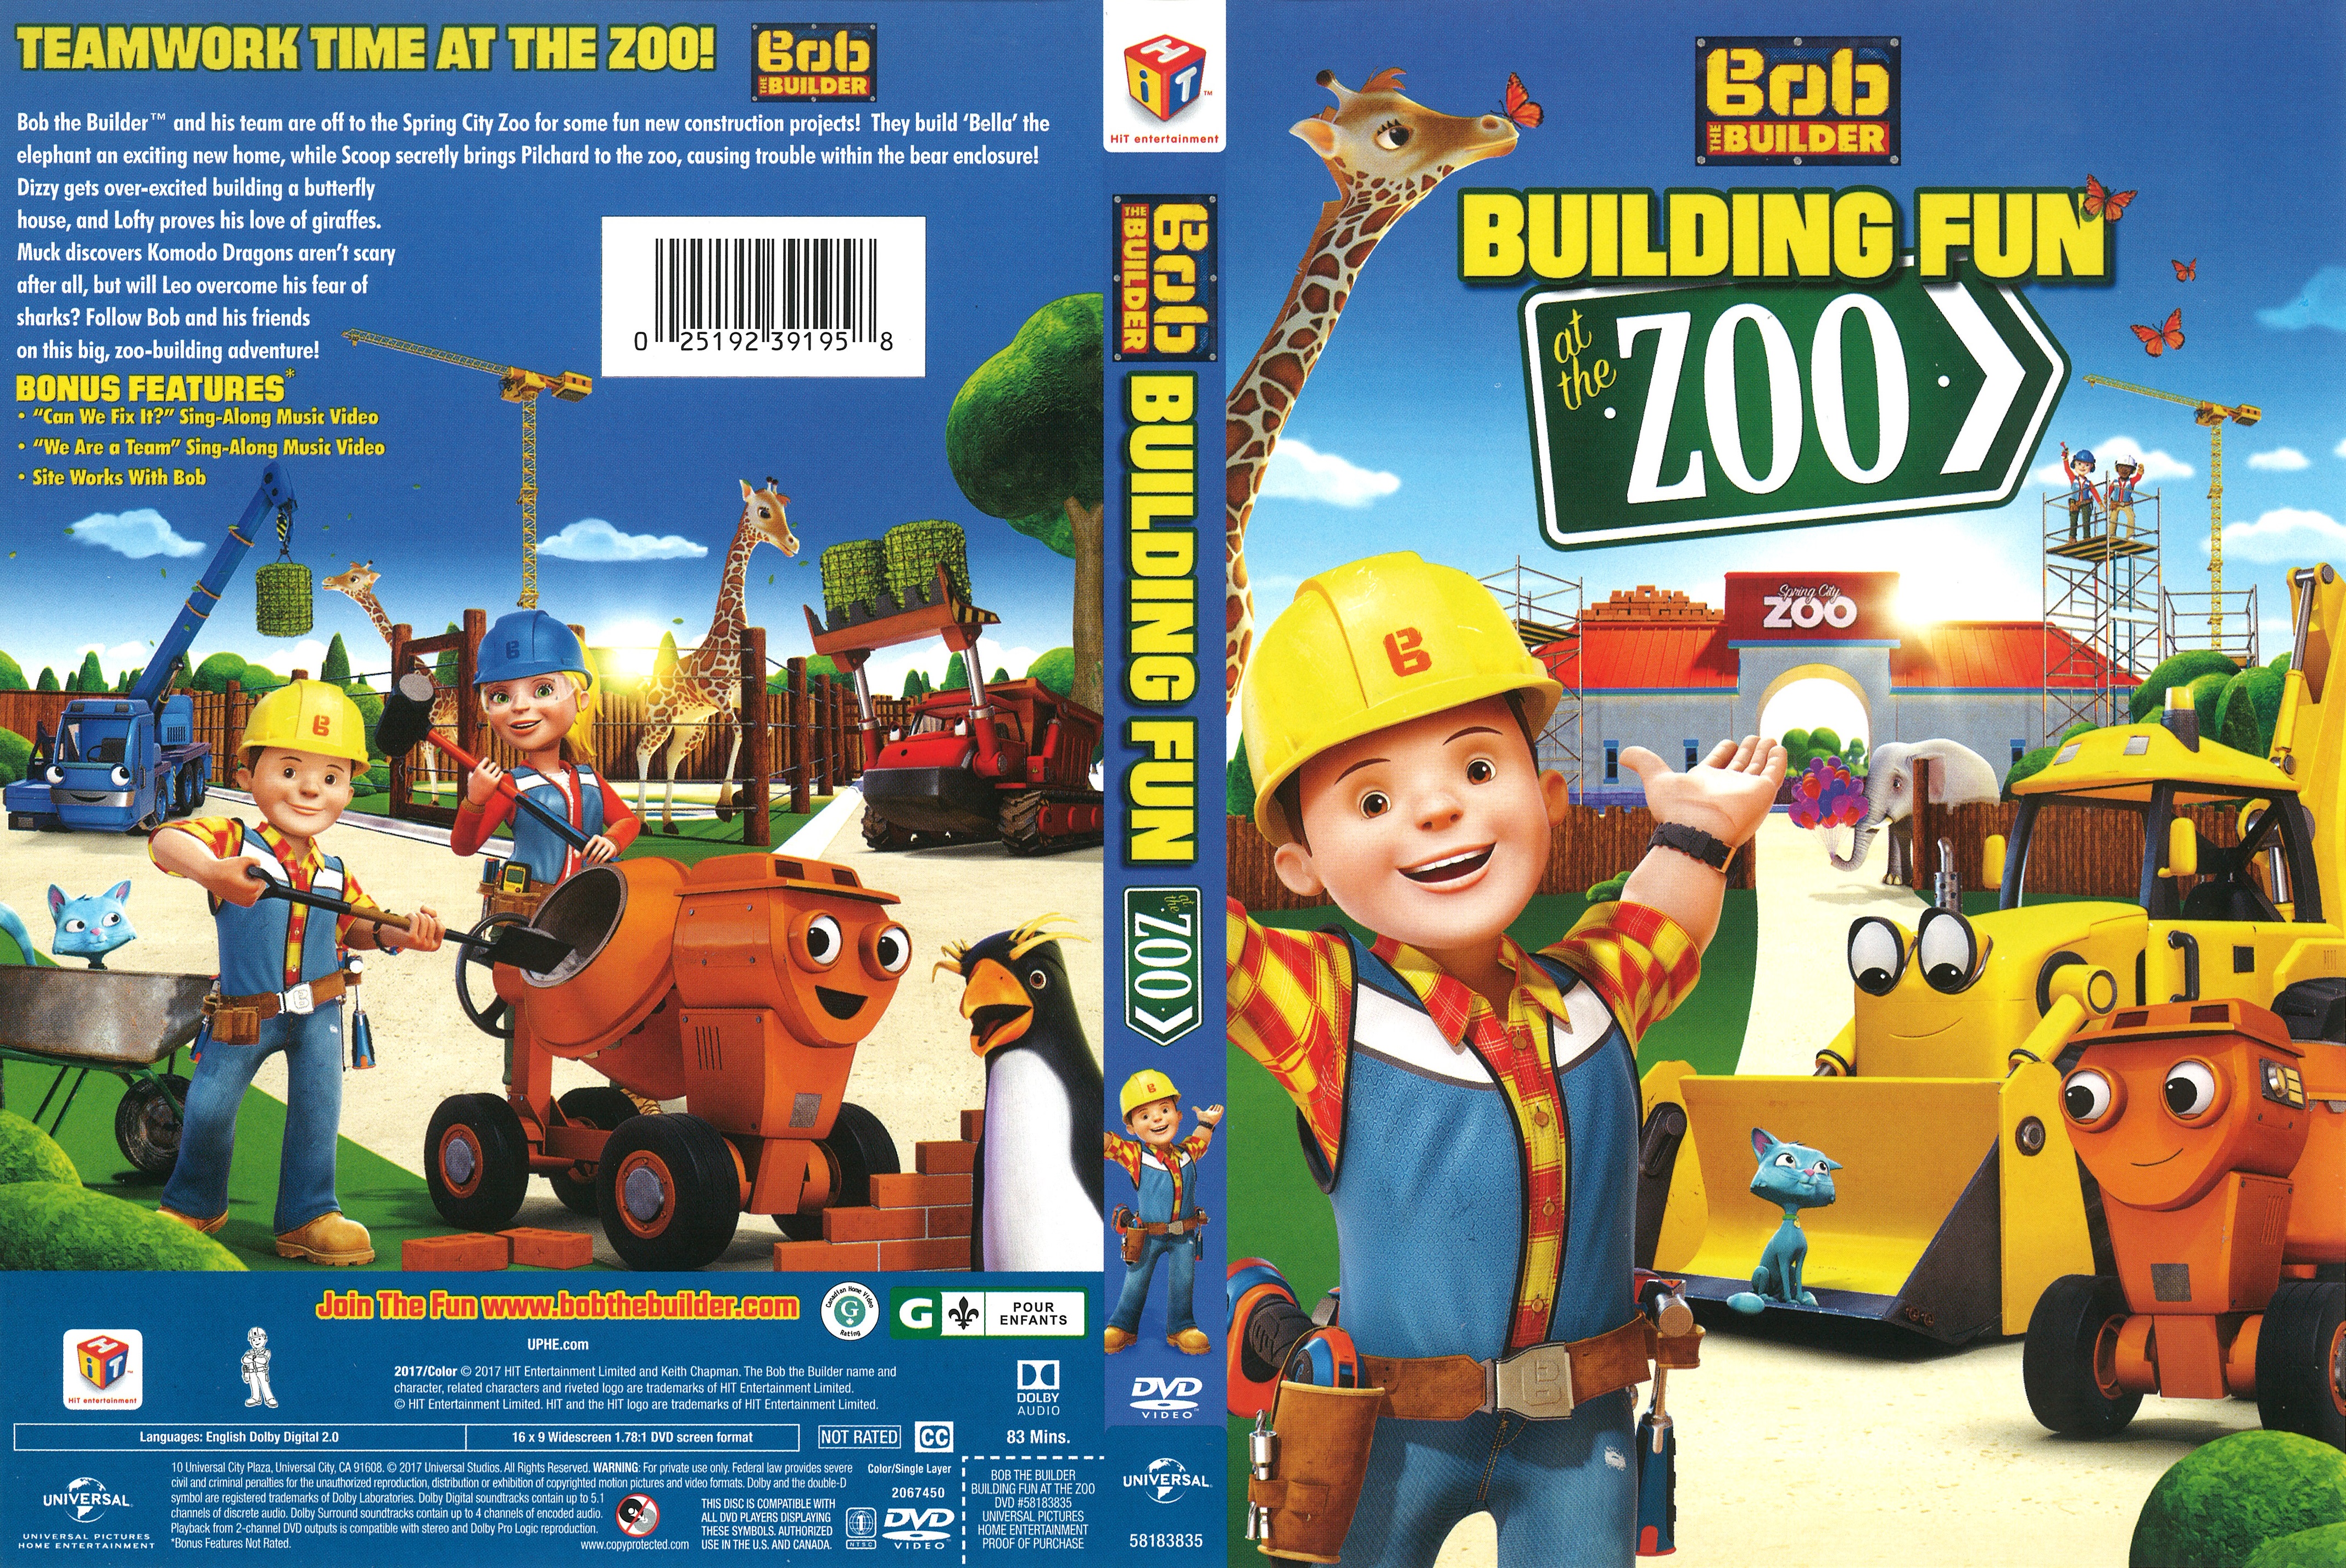 Bob the Builder Building Fun at the Zoo 2017 R1 Cover.jpg.